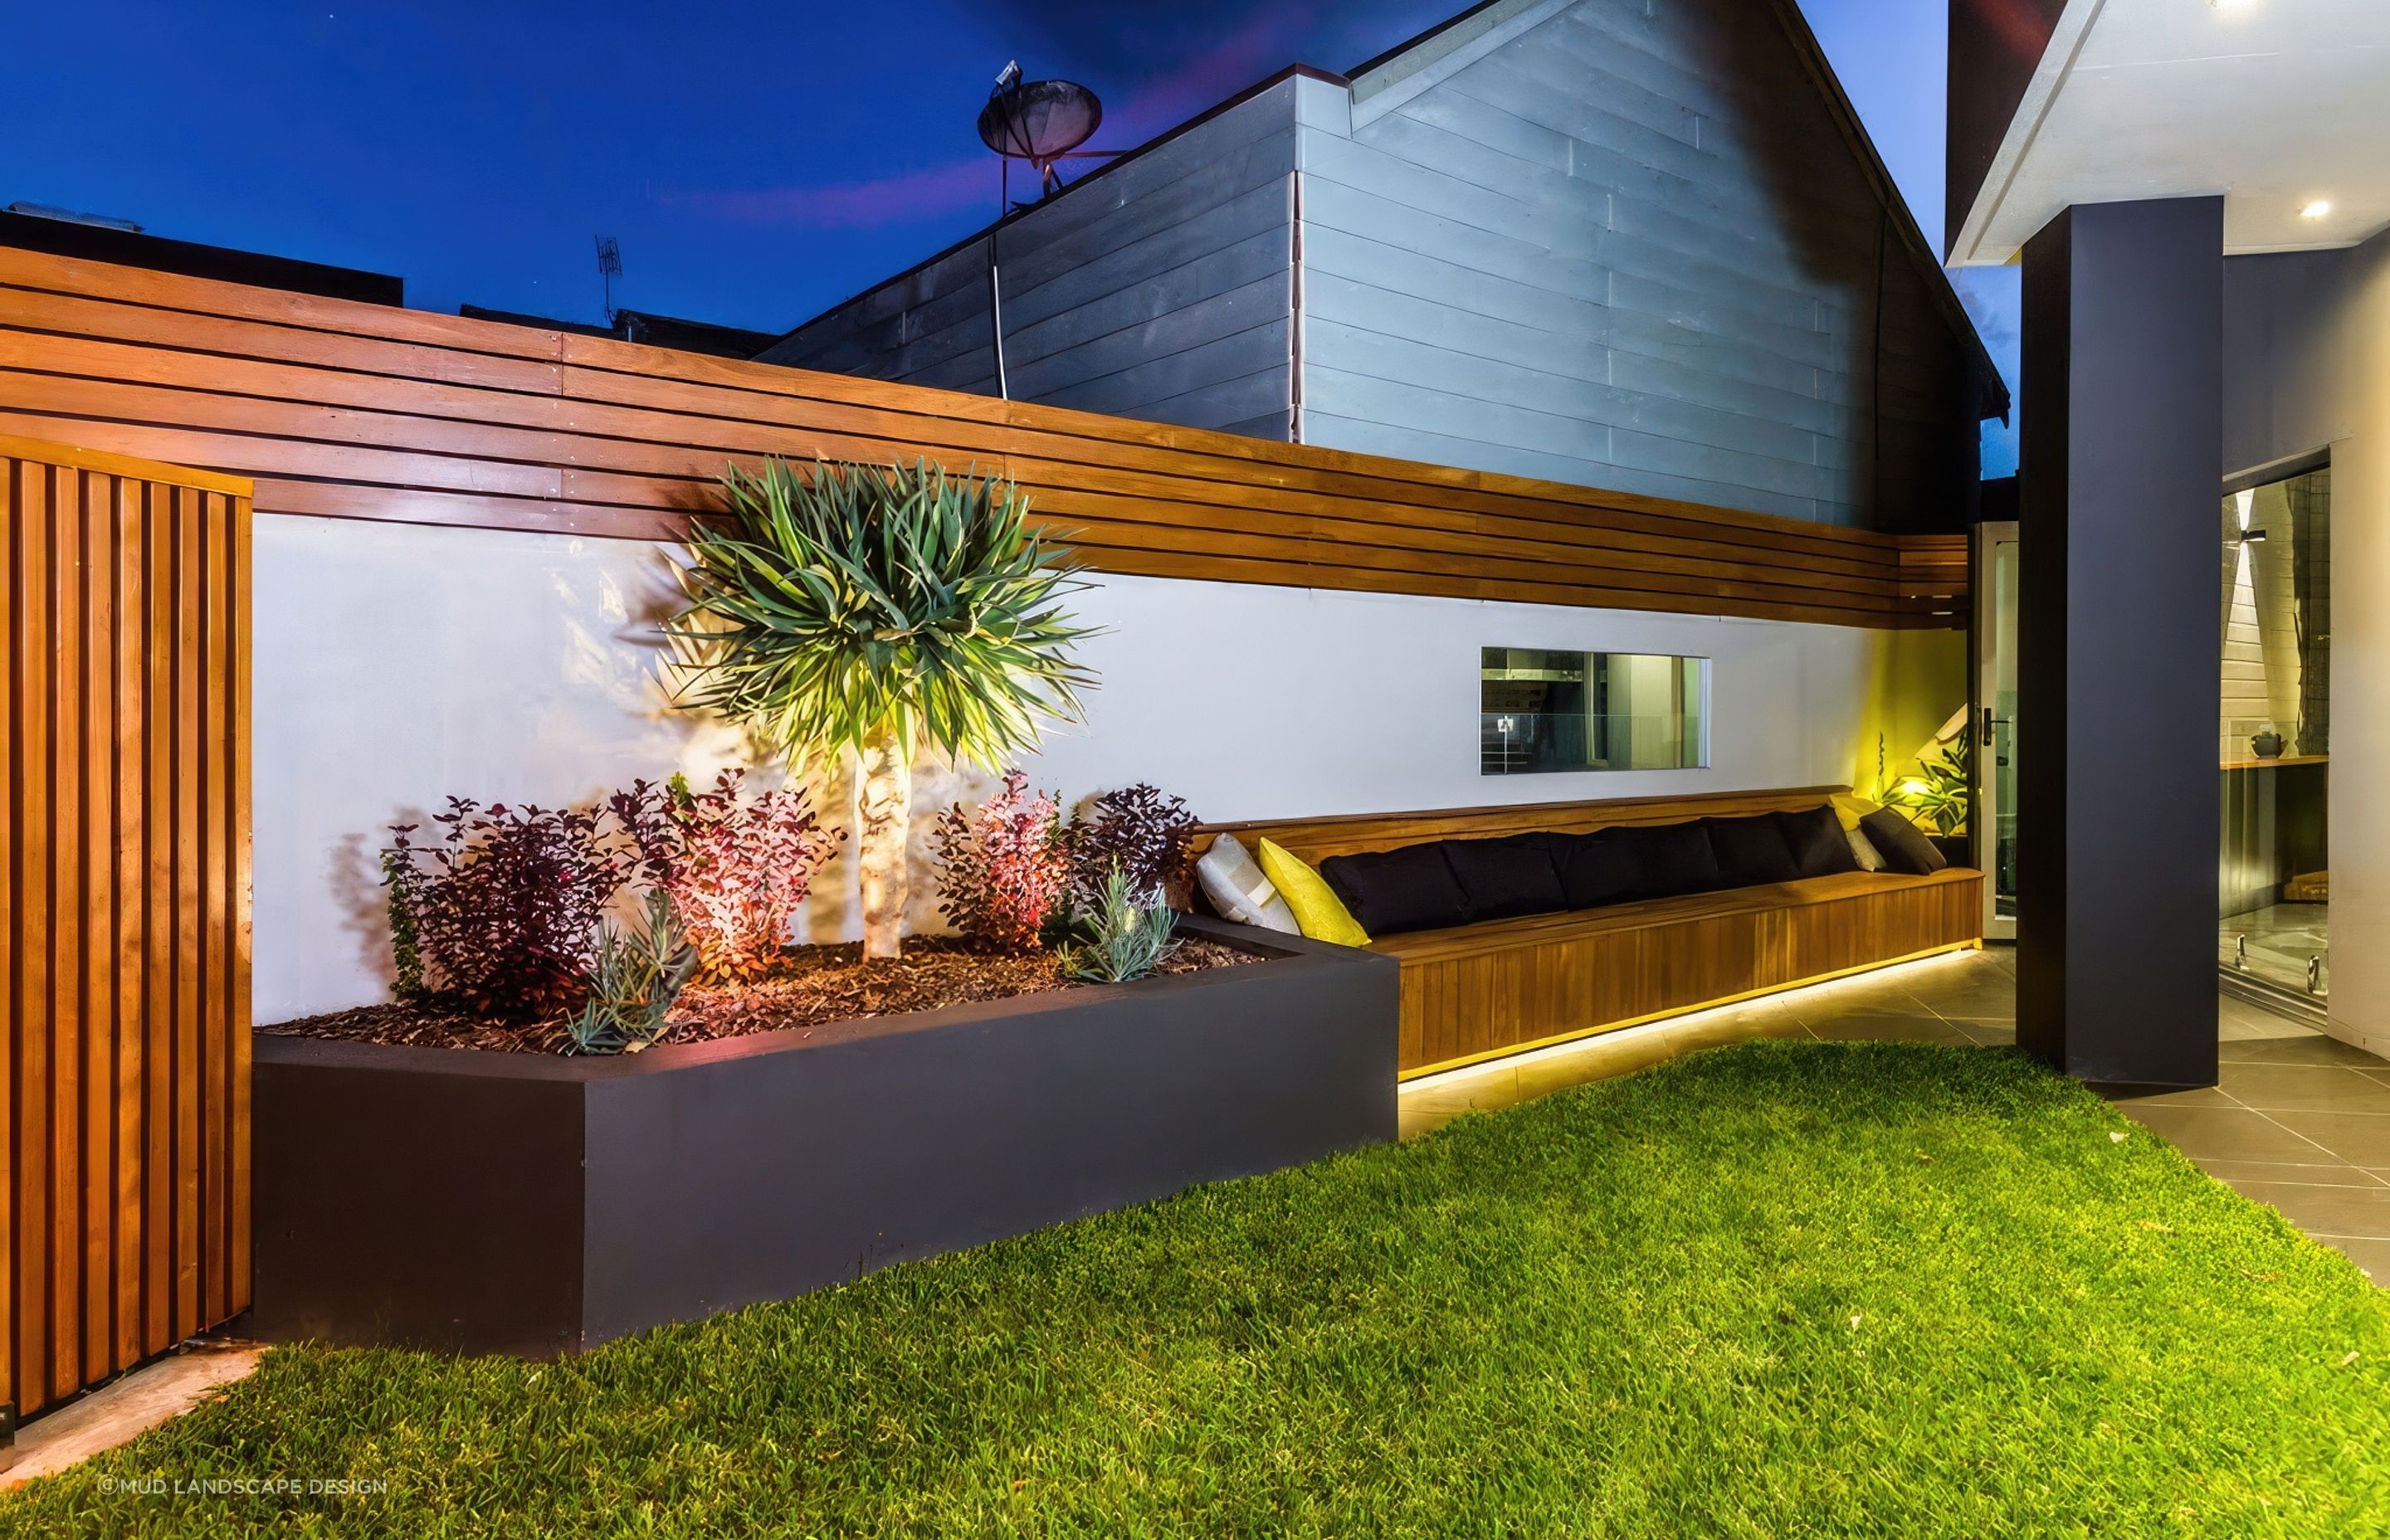 upMUD-Merewether-Landscaping-Photos-11-1024x683-1-fix-standard-scale-200x.jpg